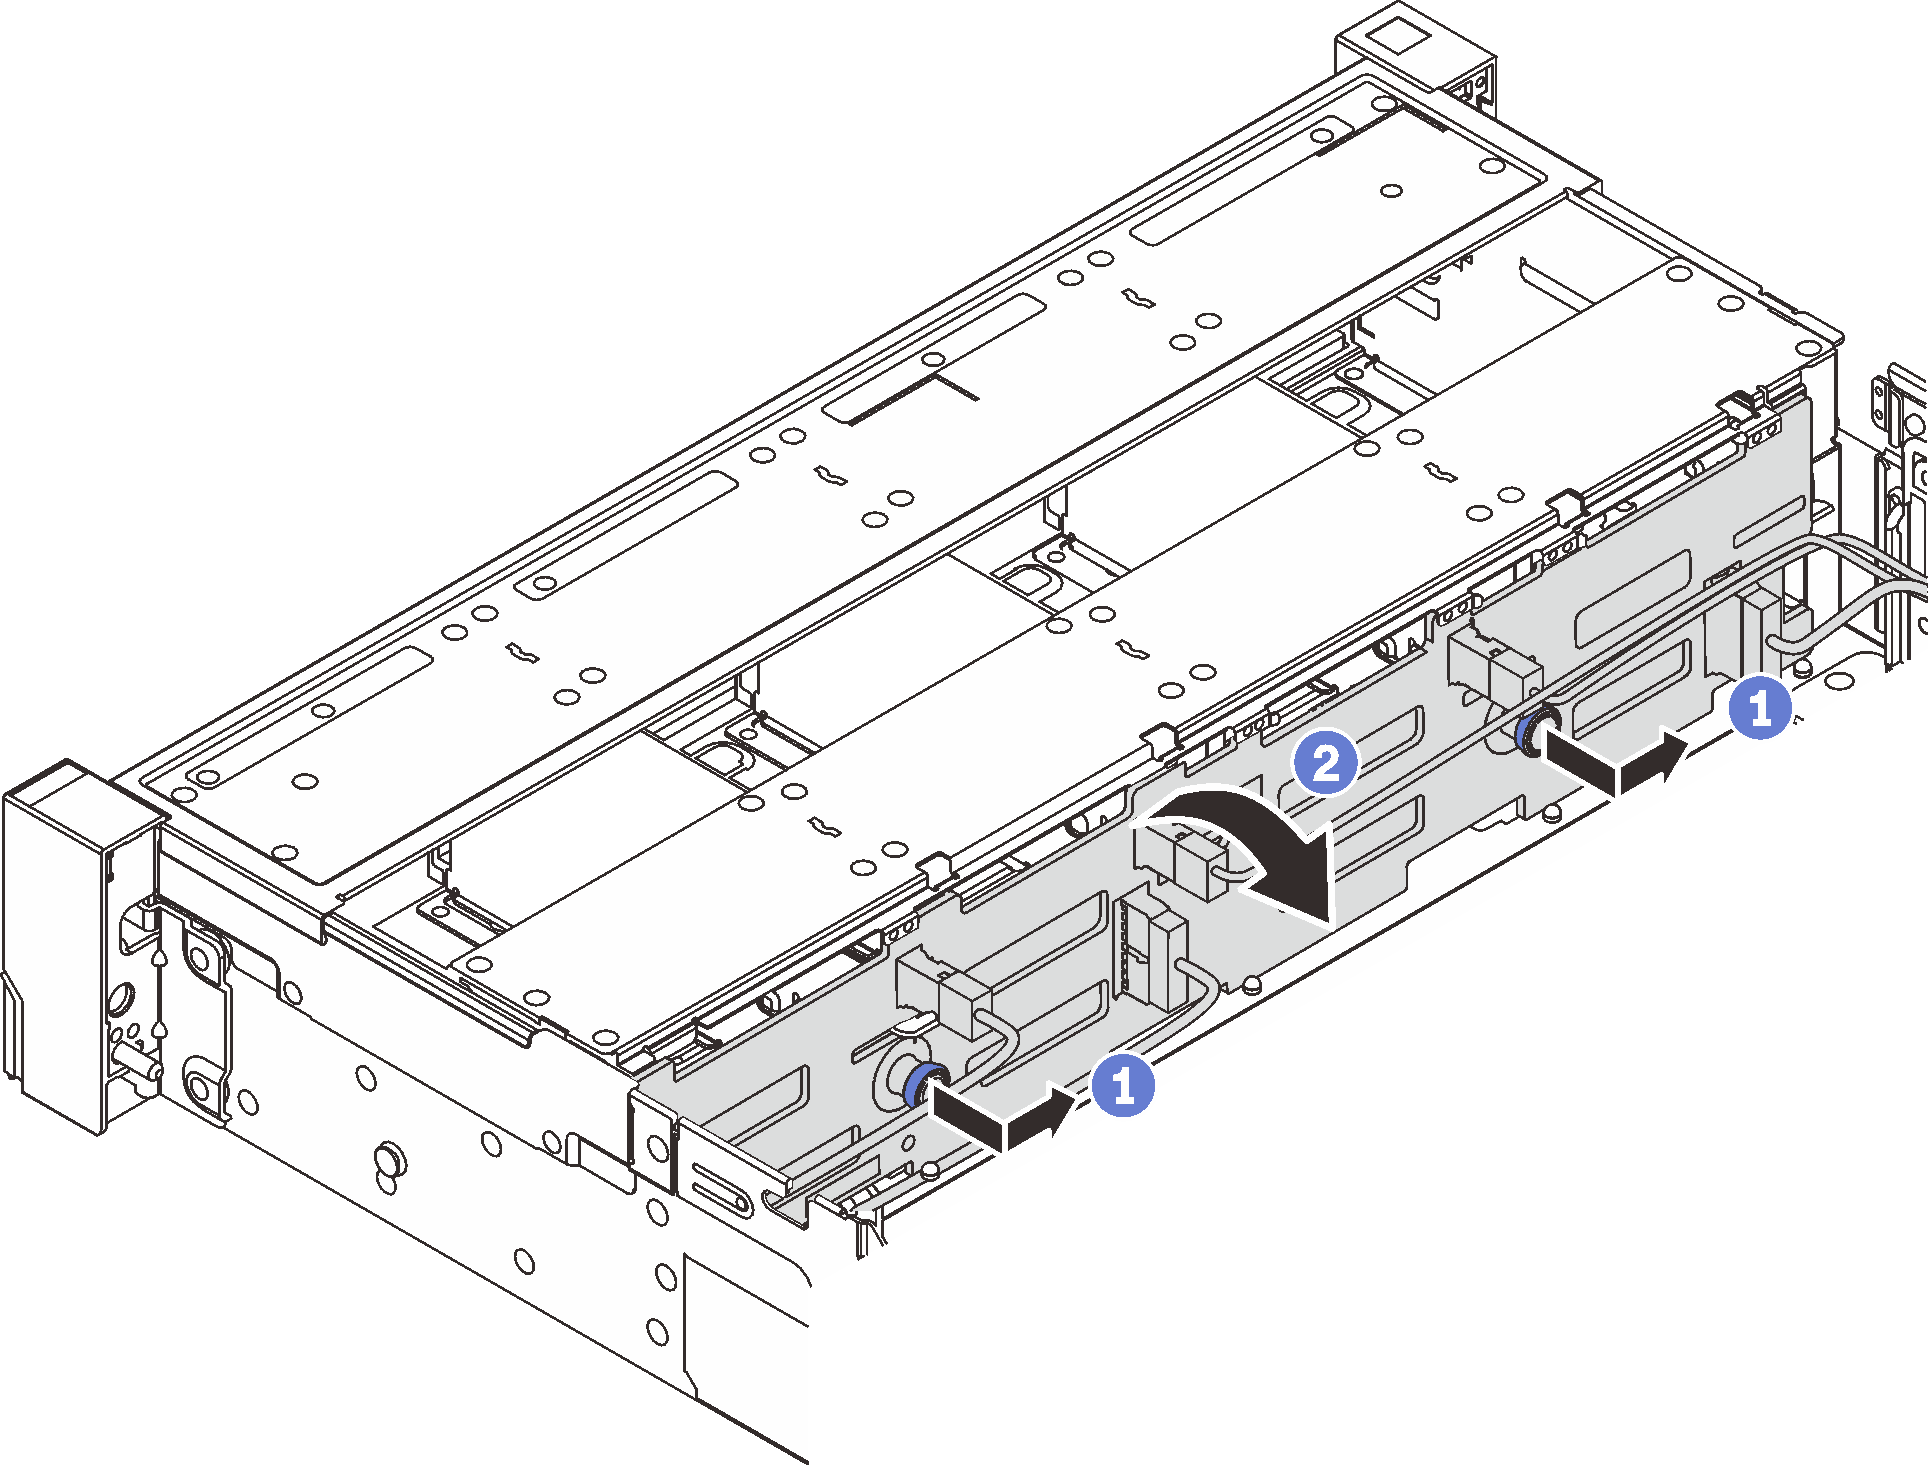 Removing the 3.5-inch drive backplane